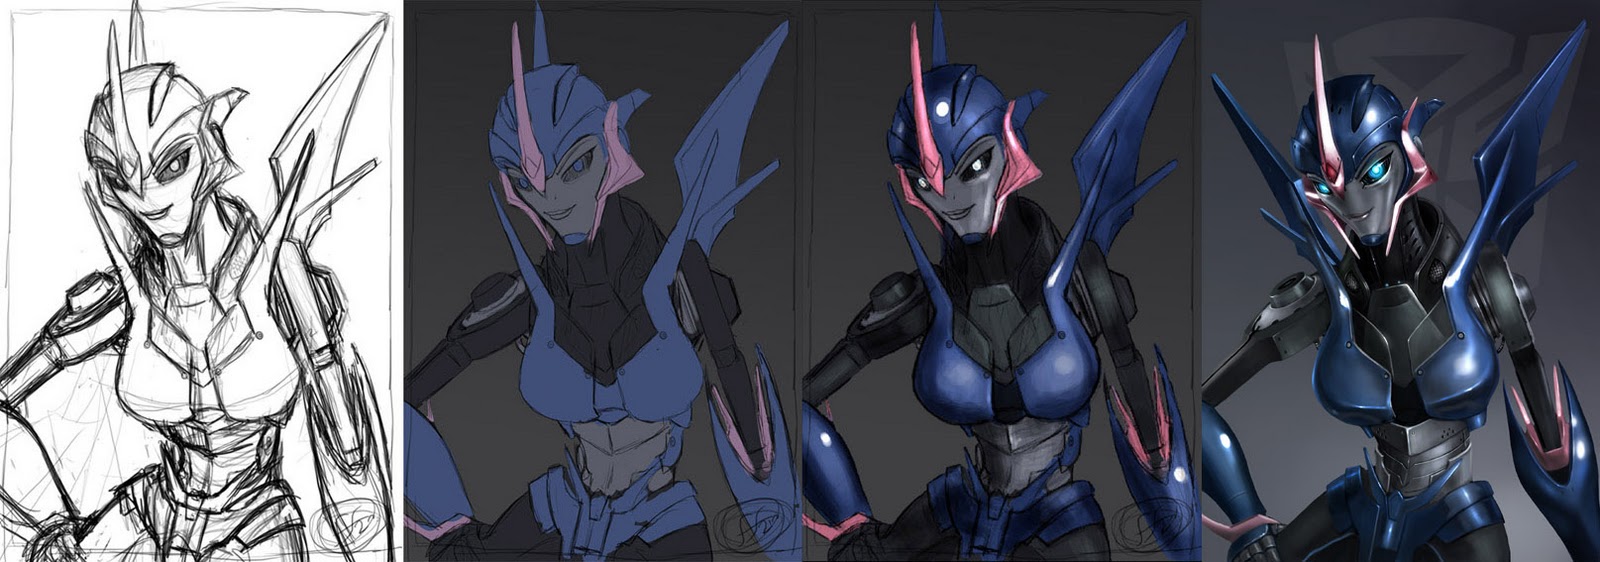 This is my fan art rendition of the new Arcee from Transformers prime. 